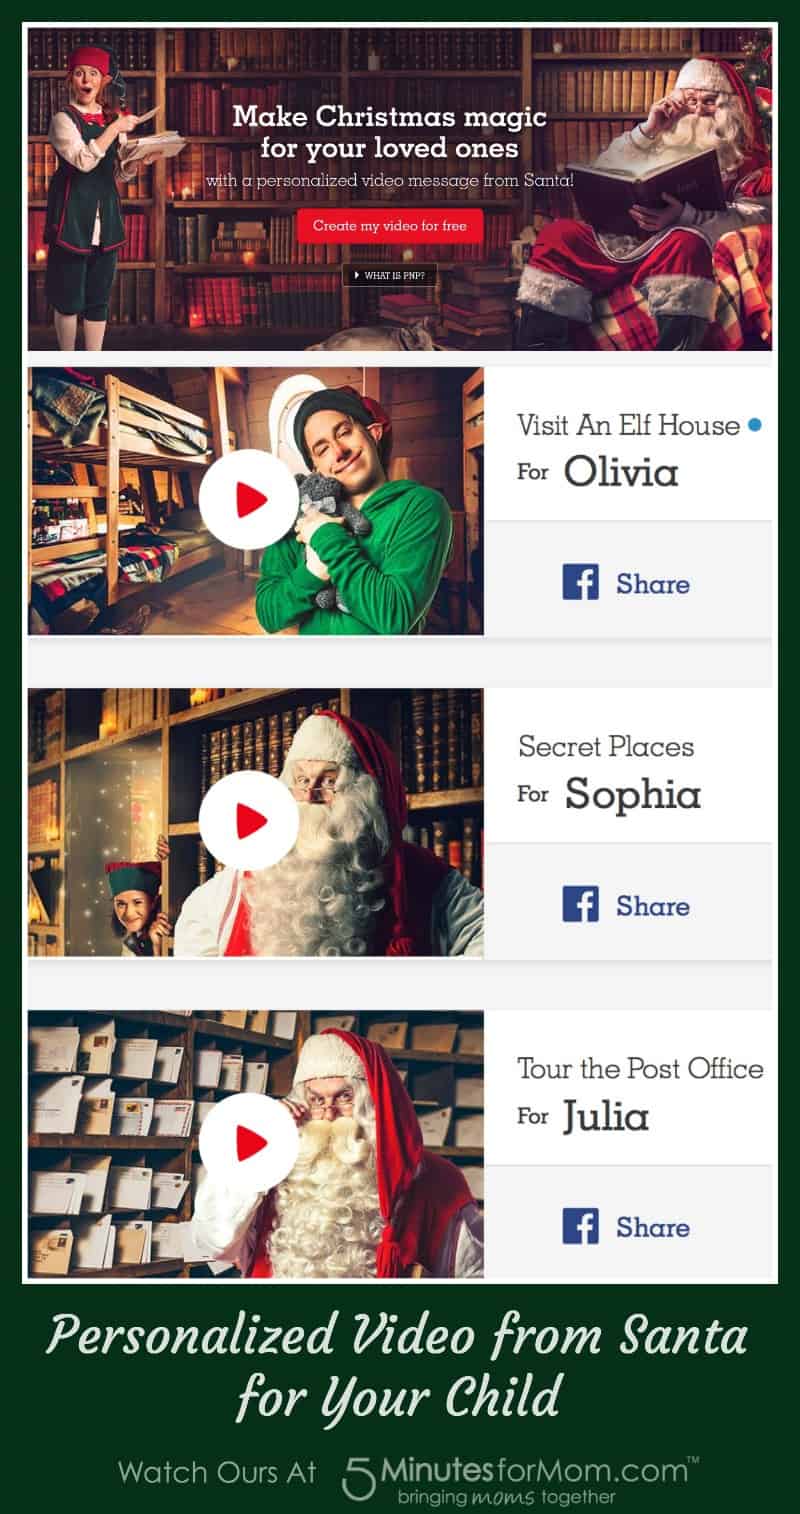 Personalized Video from Santa for Your Child - Watch Ours